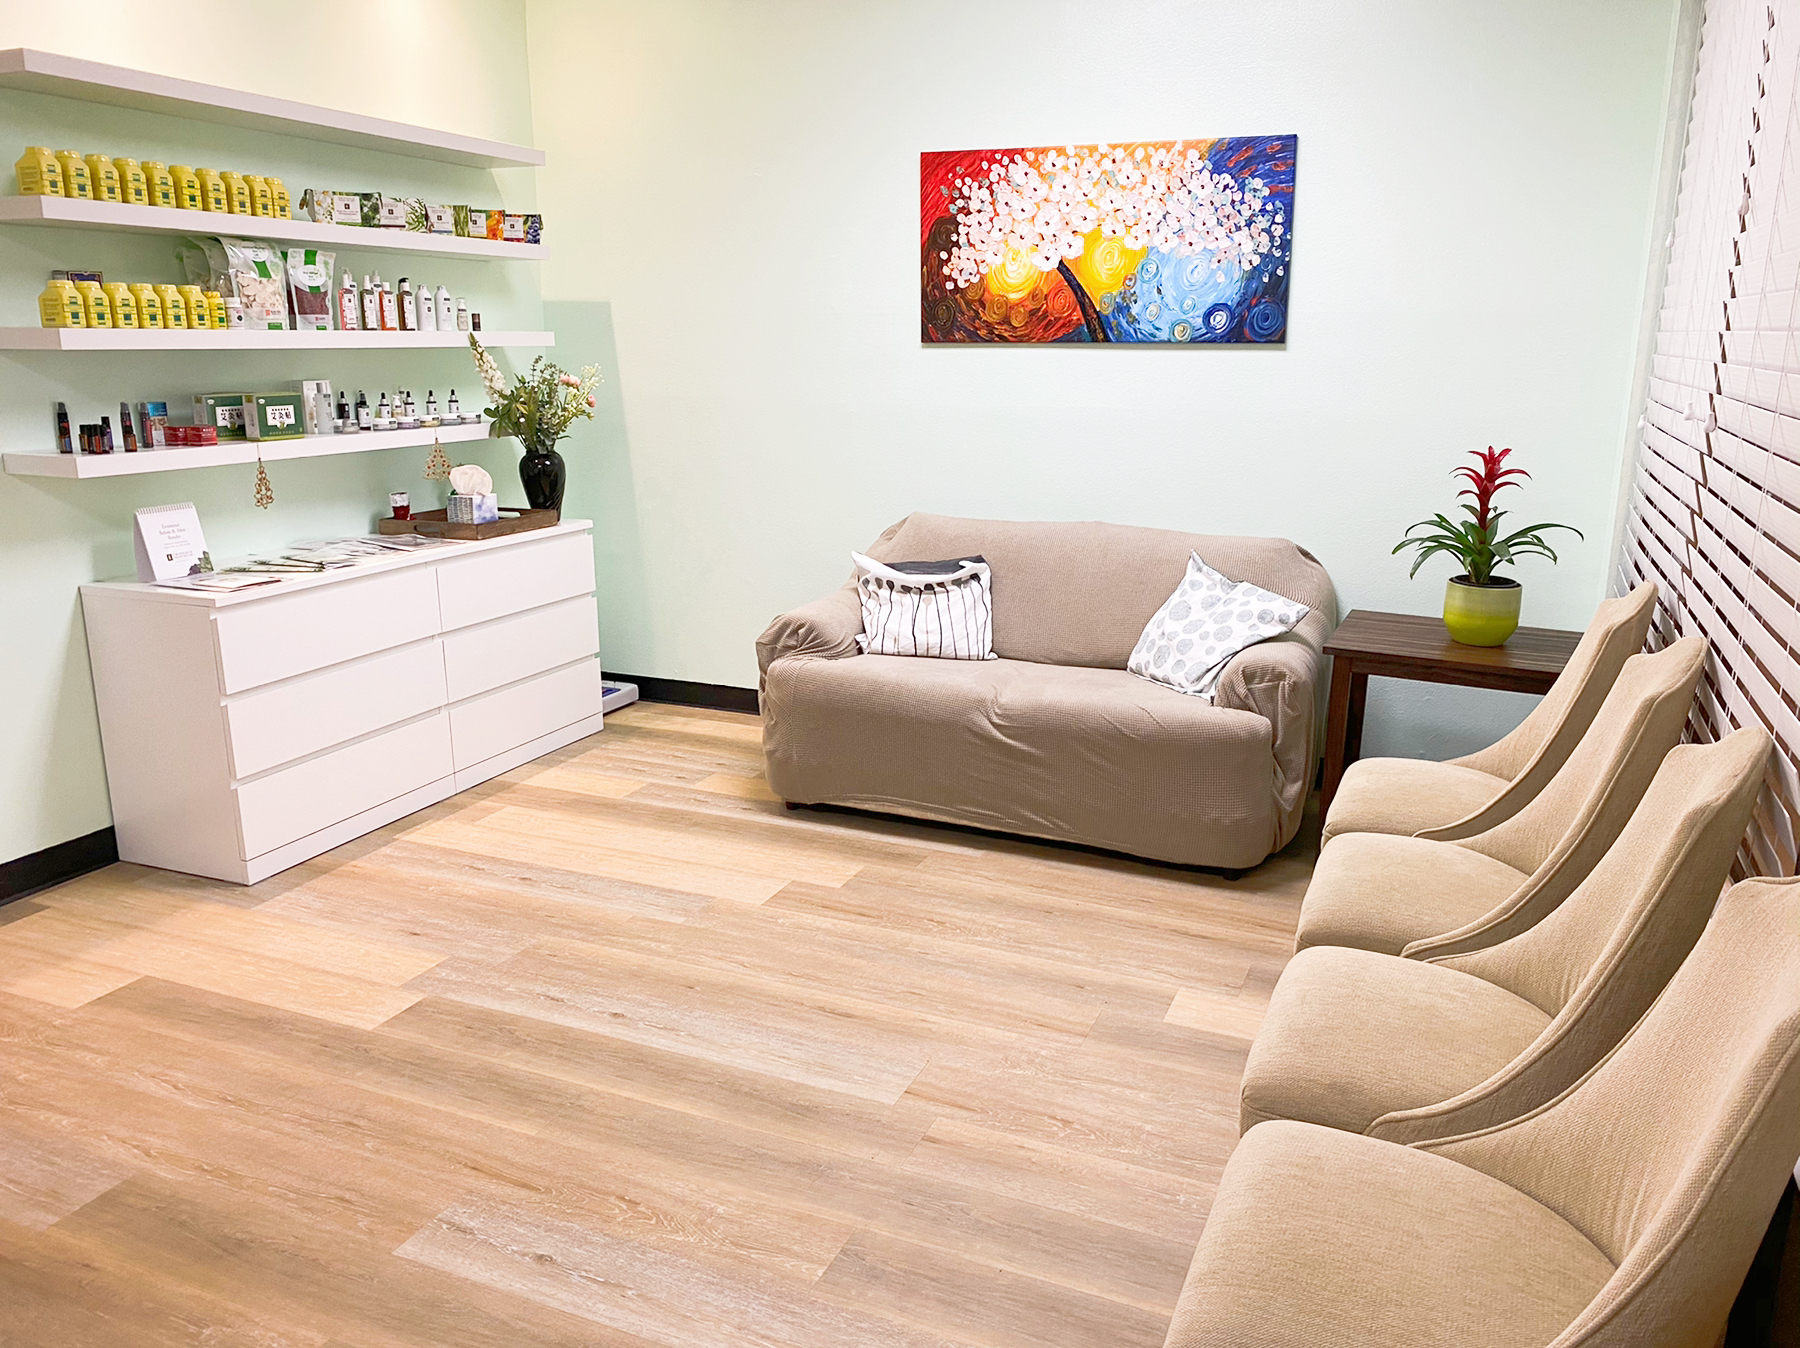 Chi Energized Acupuncture & Wellness Center